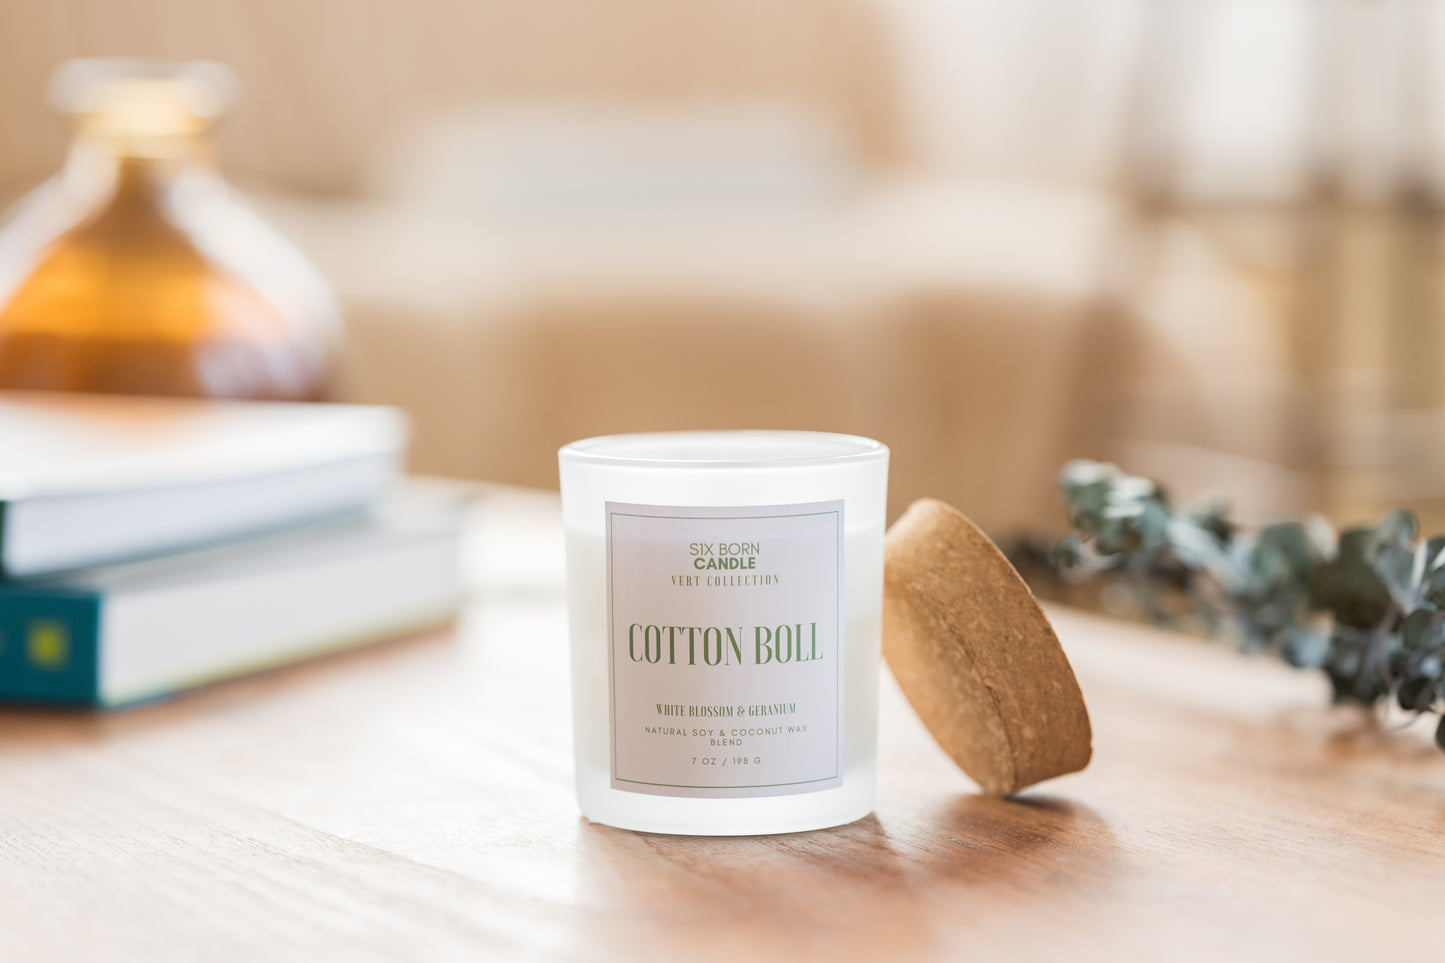 VERT Collection - COTTON BOLL Candle